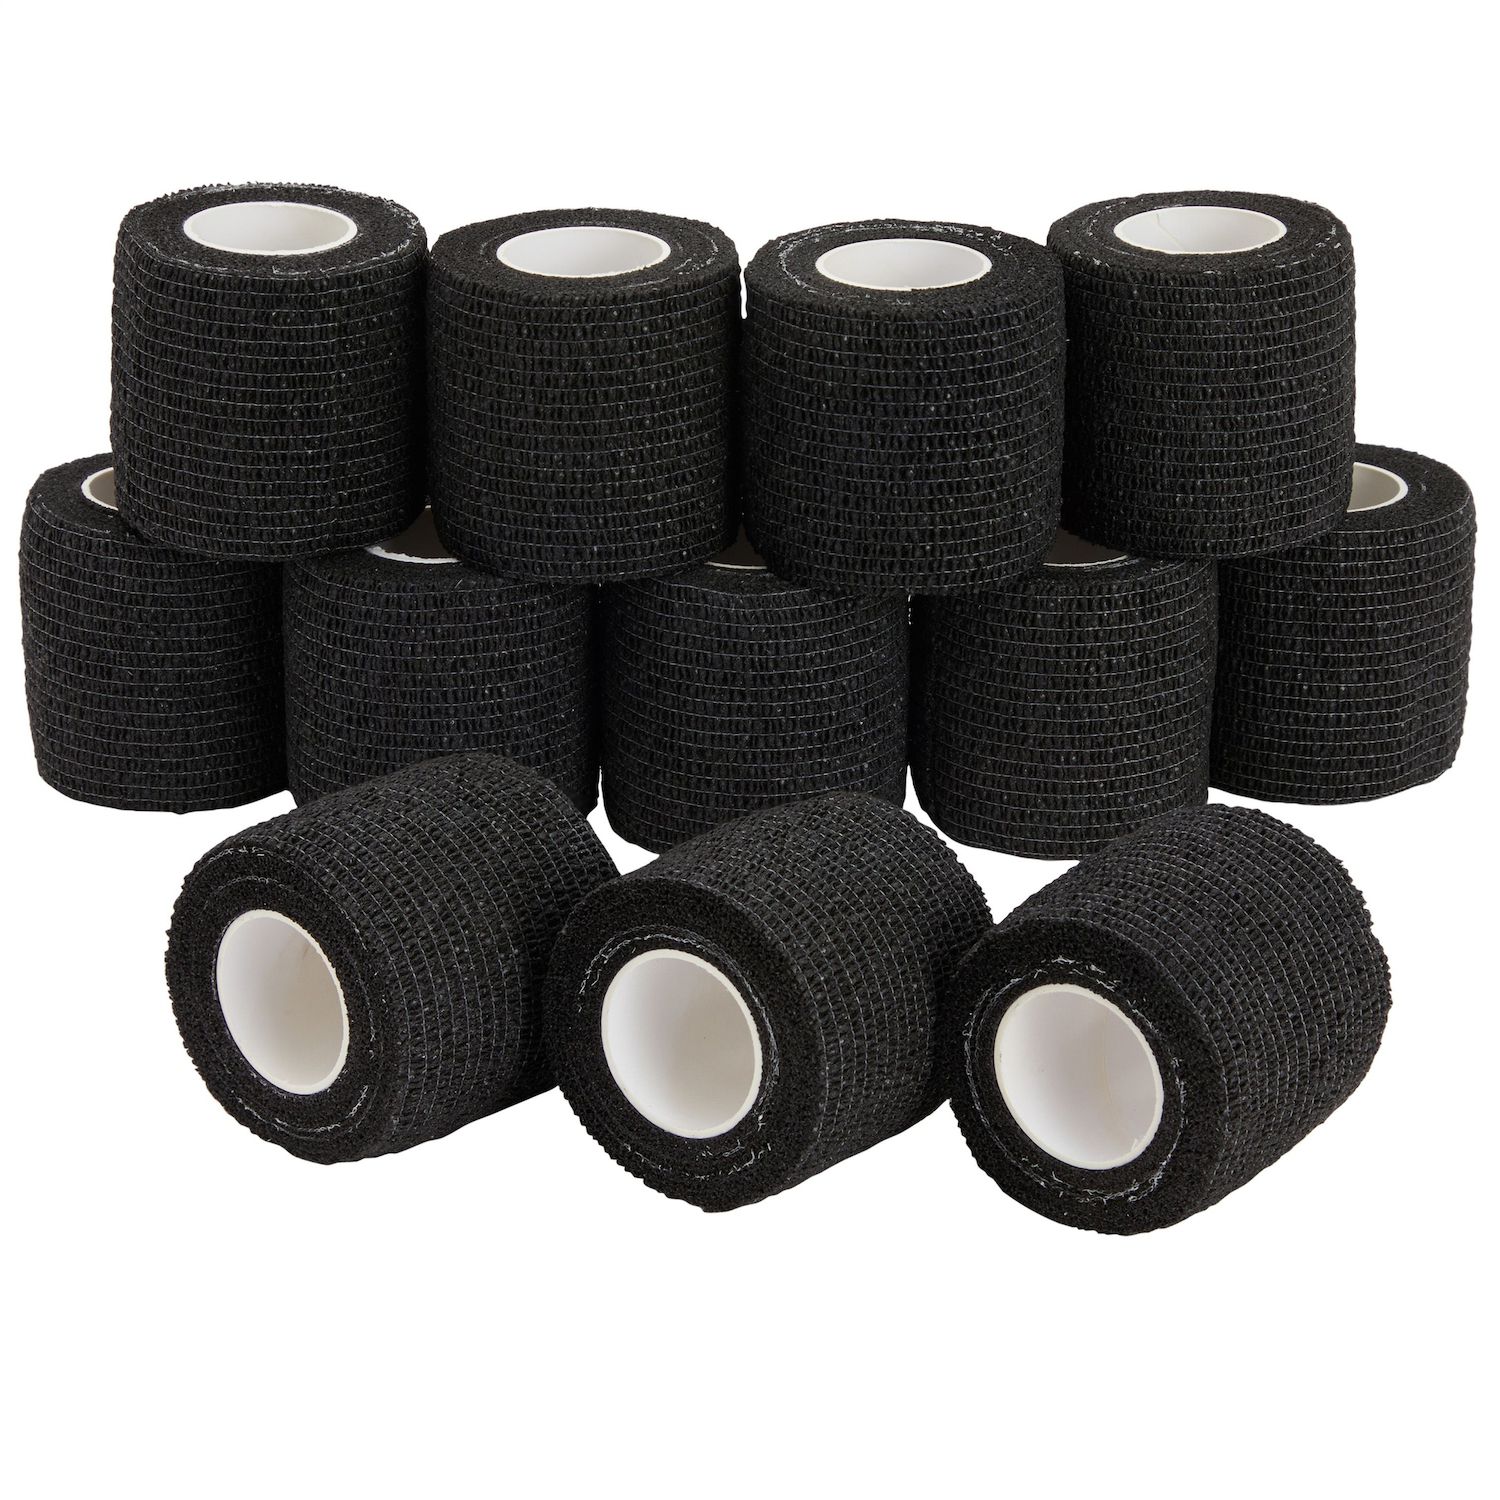 10 Pack Adhesive Foam Padding 1/4 Inch Thick Neoprene Rubber Sheets (Black,  6x6 in)